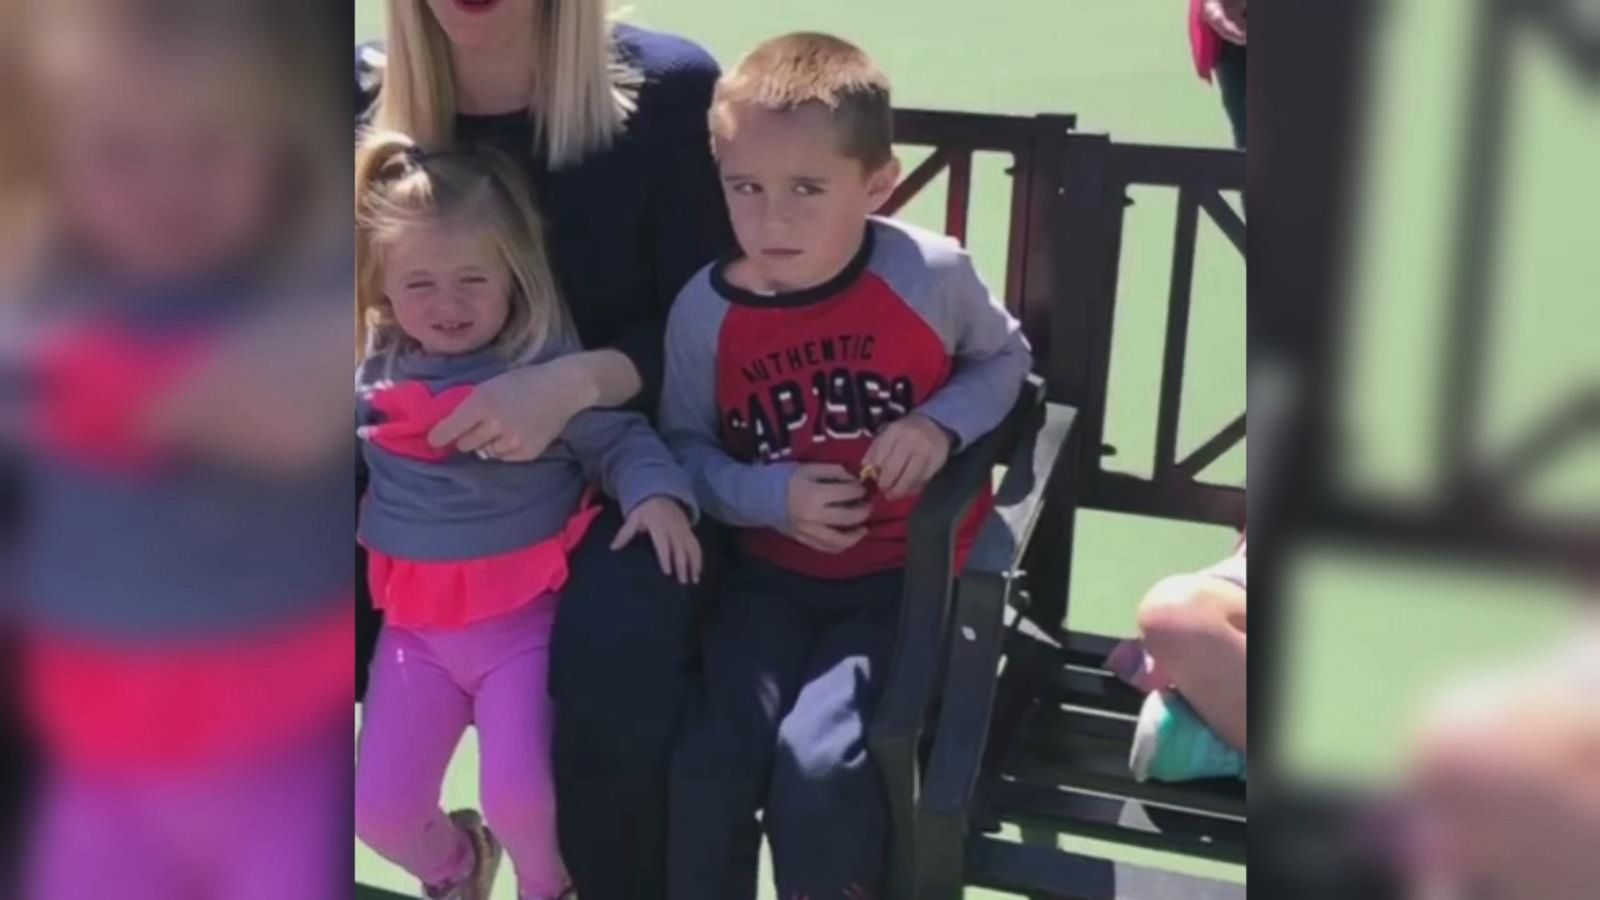 VIDEO: Little boy's expression at learning new sibling's gender says it all